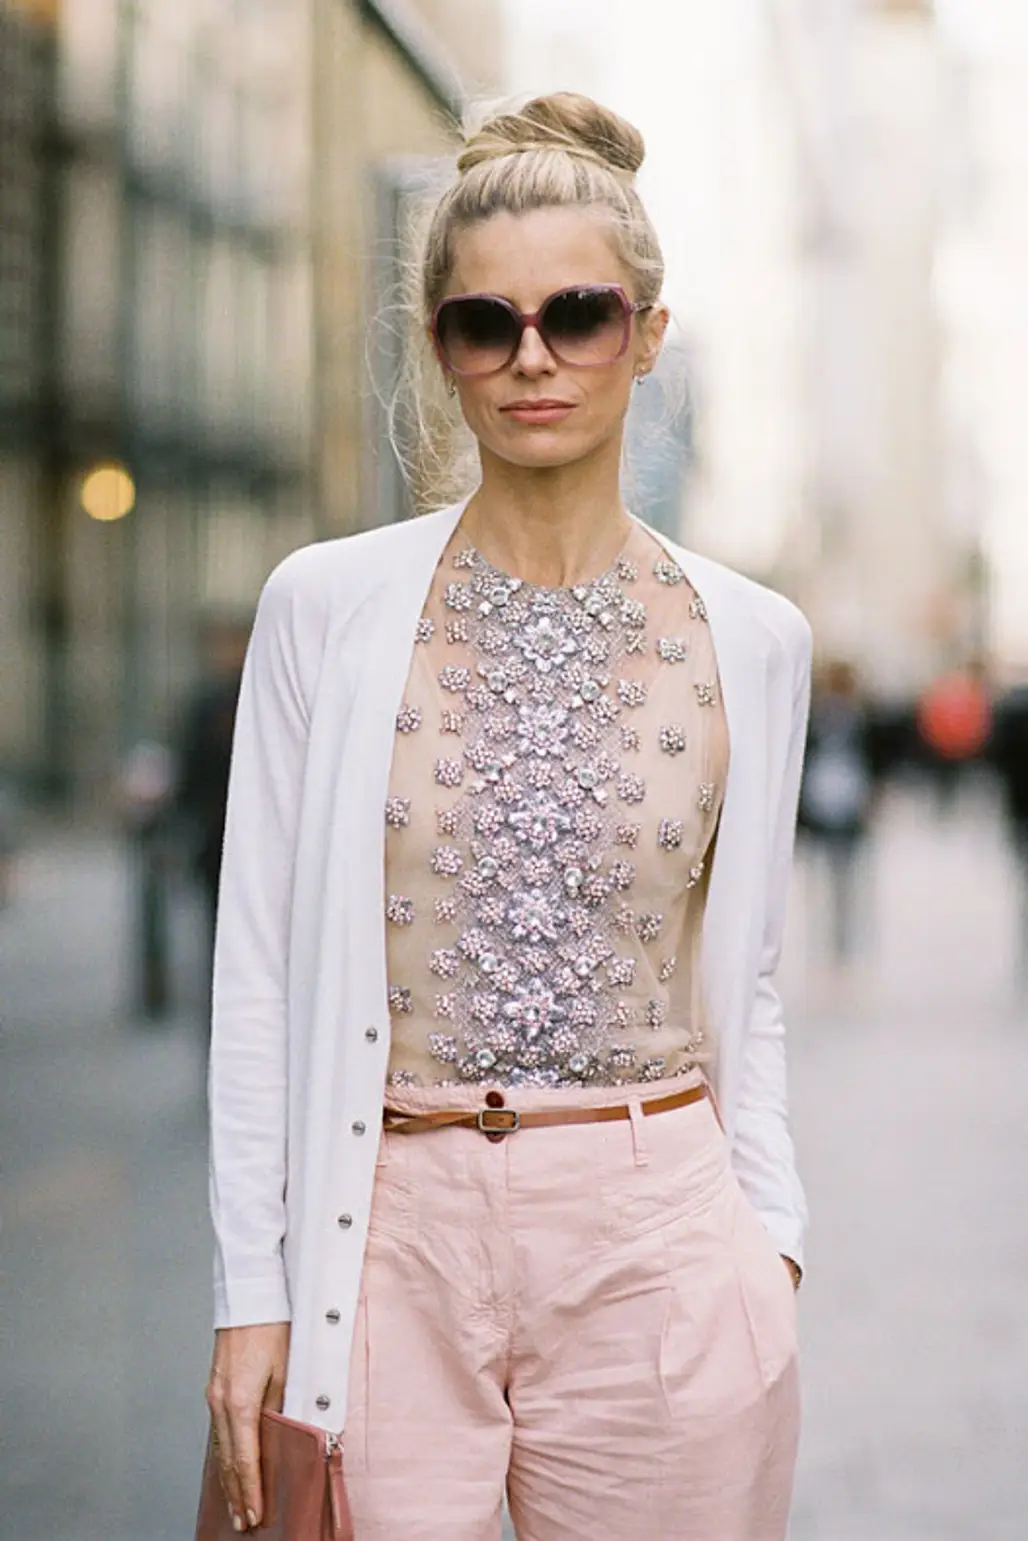 Try Texture and Embellishments